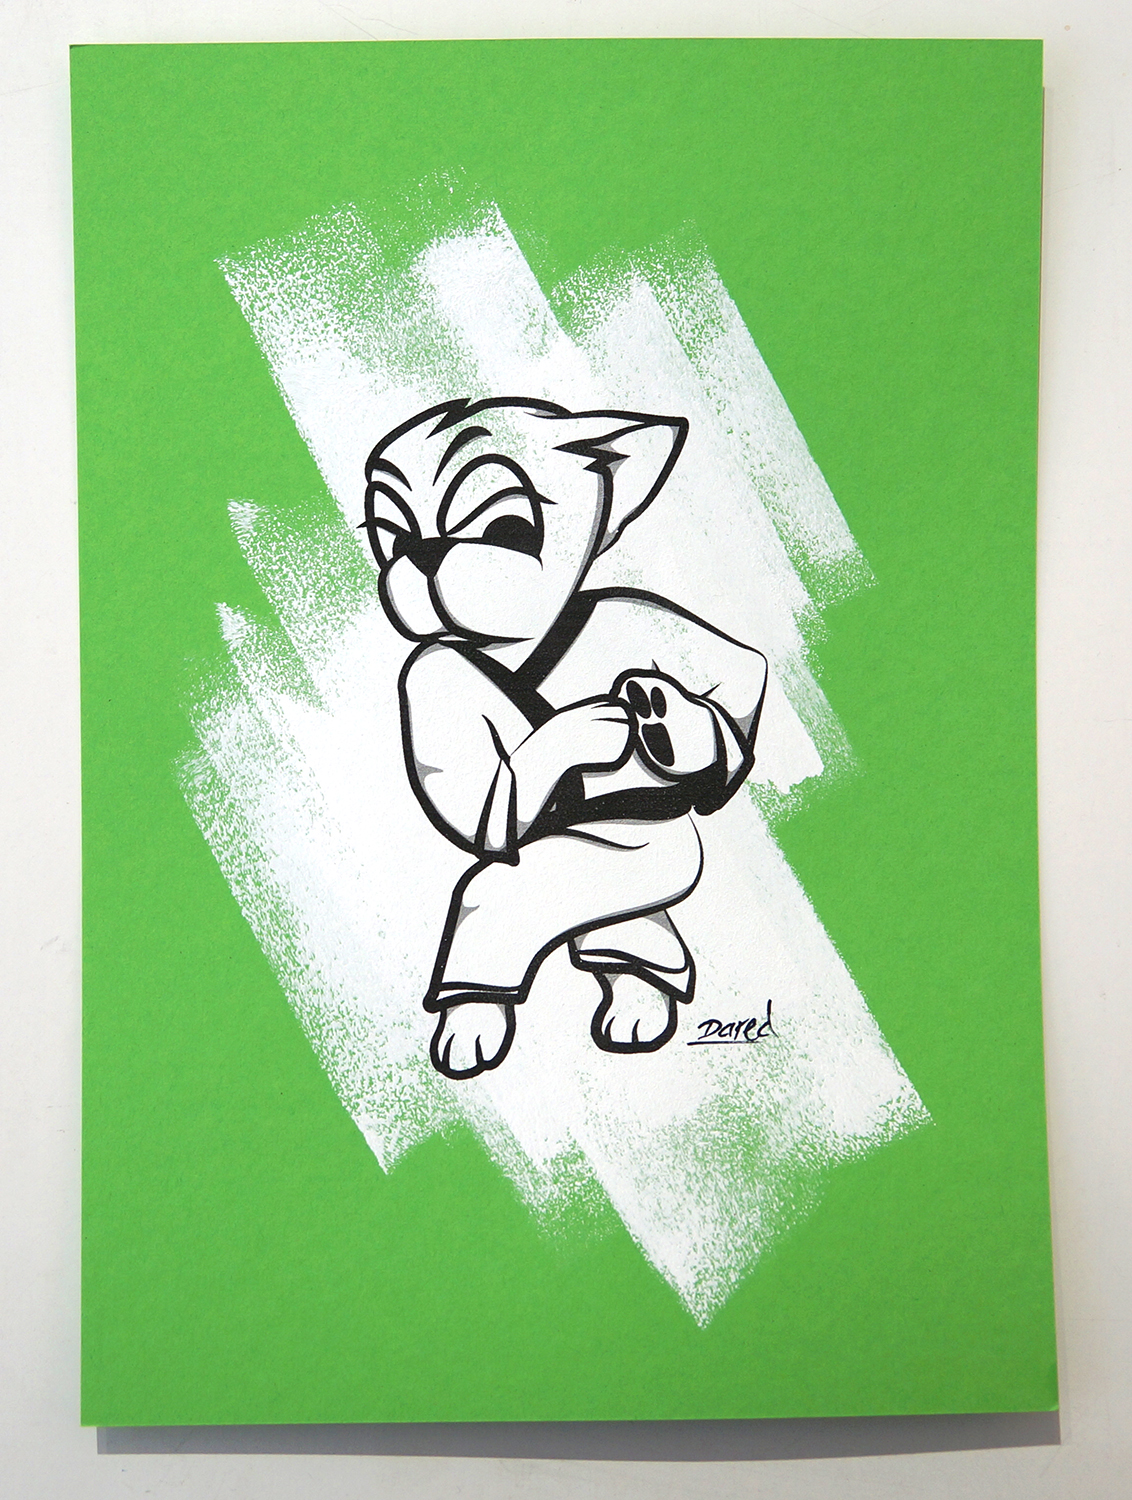 Dared: "Martial Art III"  - mixed media on green paper - available at SALZIG Berlin